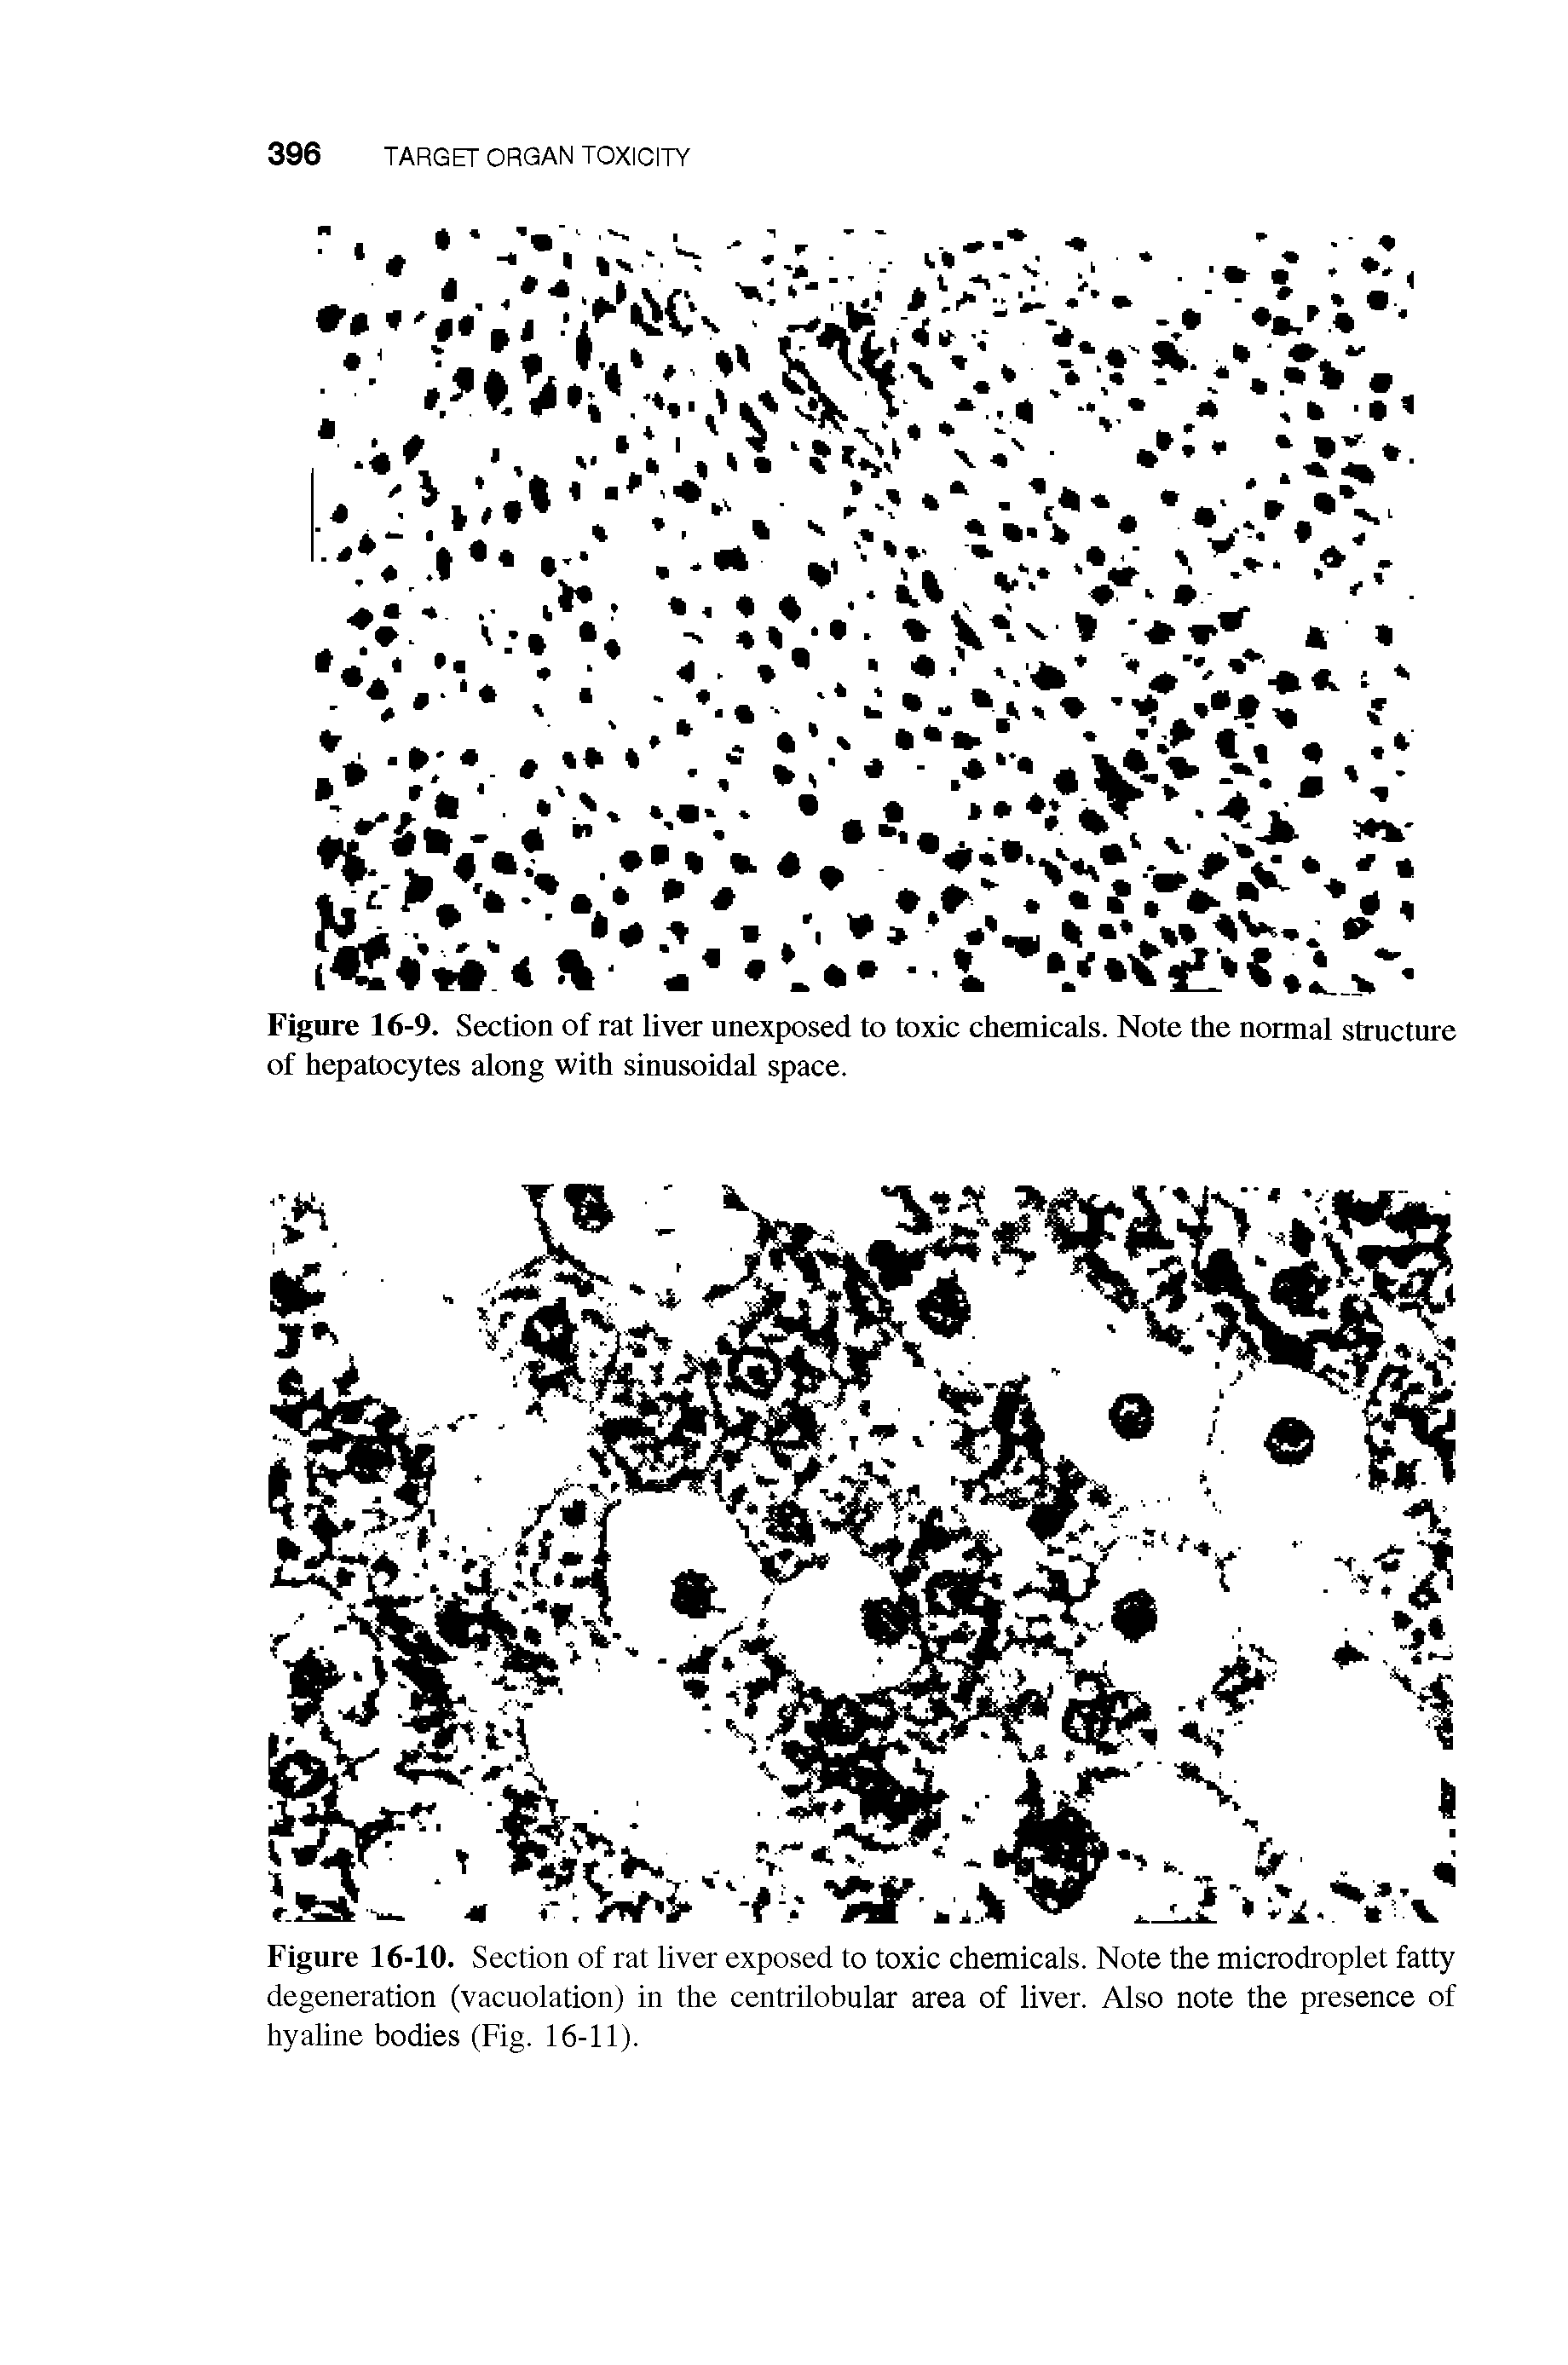 Figure 16-9. Section of rat liver unexposed to toxic chemicals. Note the normal structure of hepatocytes along with sinusoidal space.